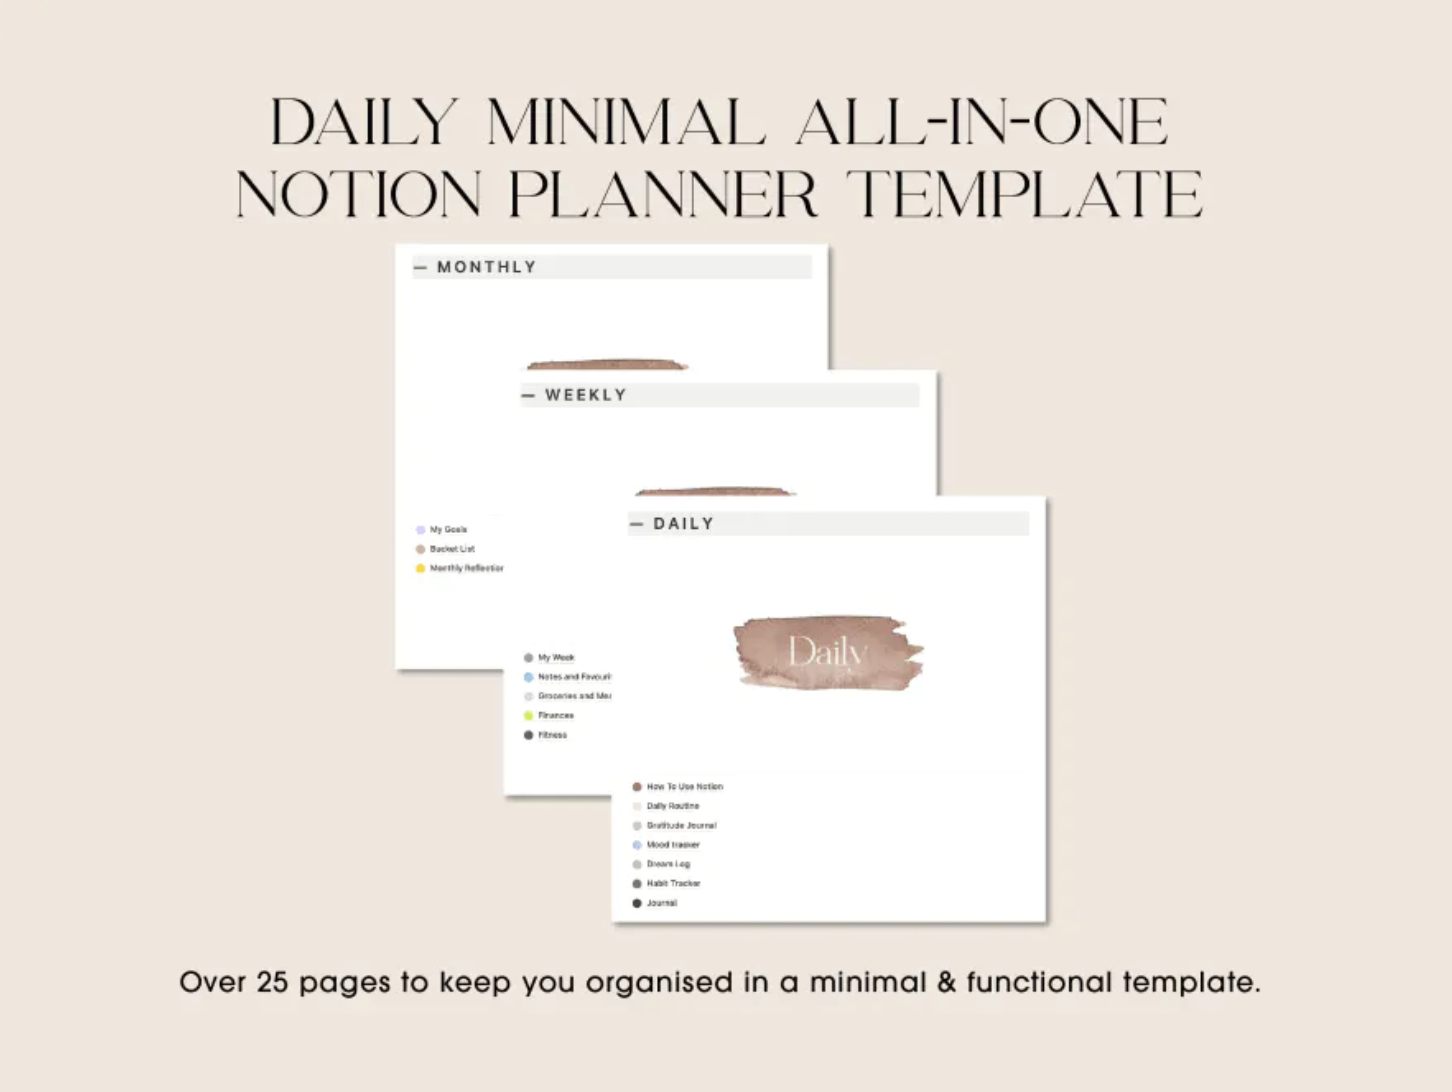 Aesthetic All In One Notion Template | 25 + Pages | Daily, Weekly and Monthly Templates | Finance and Meals Tracker.